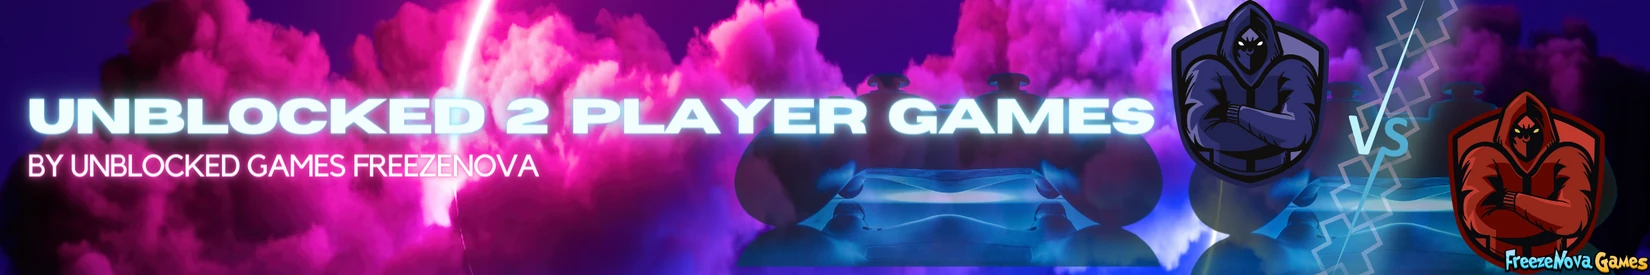 2-Player Games Banner